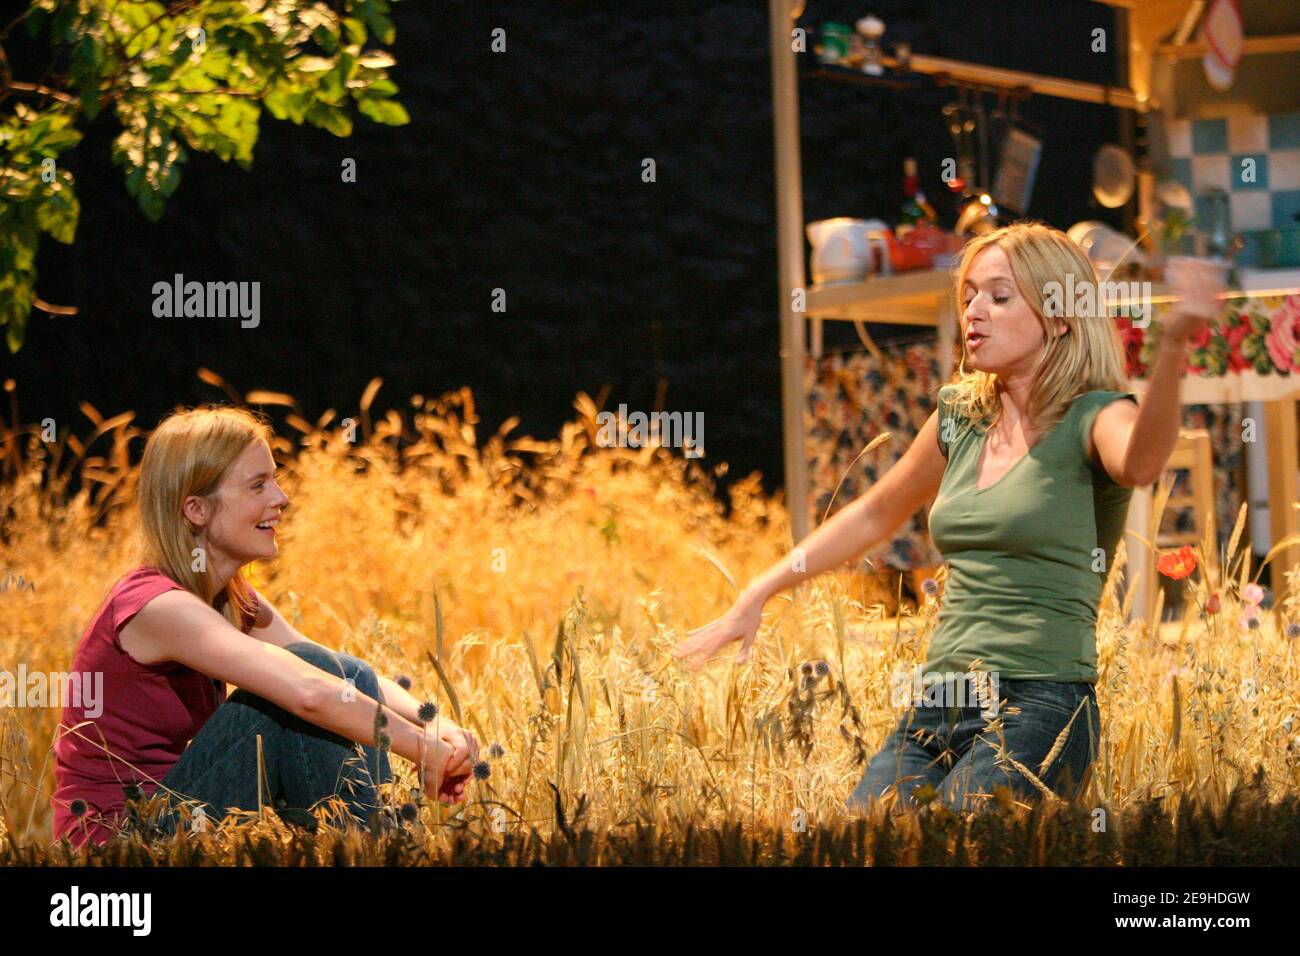 French actresses Isabelle Carre (L) and Lea Drucker play 'Blanc' staged by Zabou Breitman at 'Le Theatre de la Madeleine' in Paris, France, on September 9, 2006. Photo by Mehdi Taamallah/ABACAPRESS.COM Stock Photo